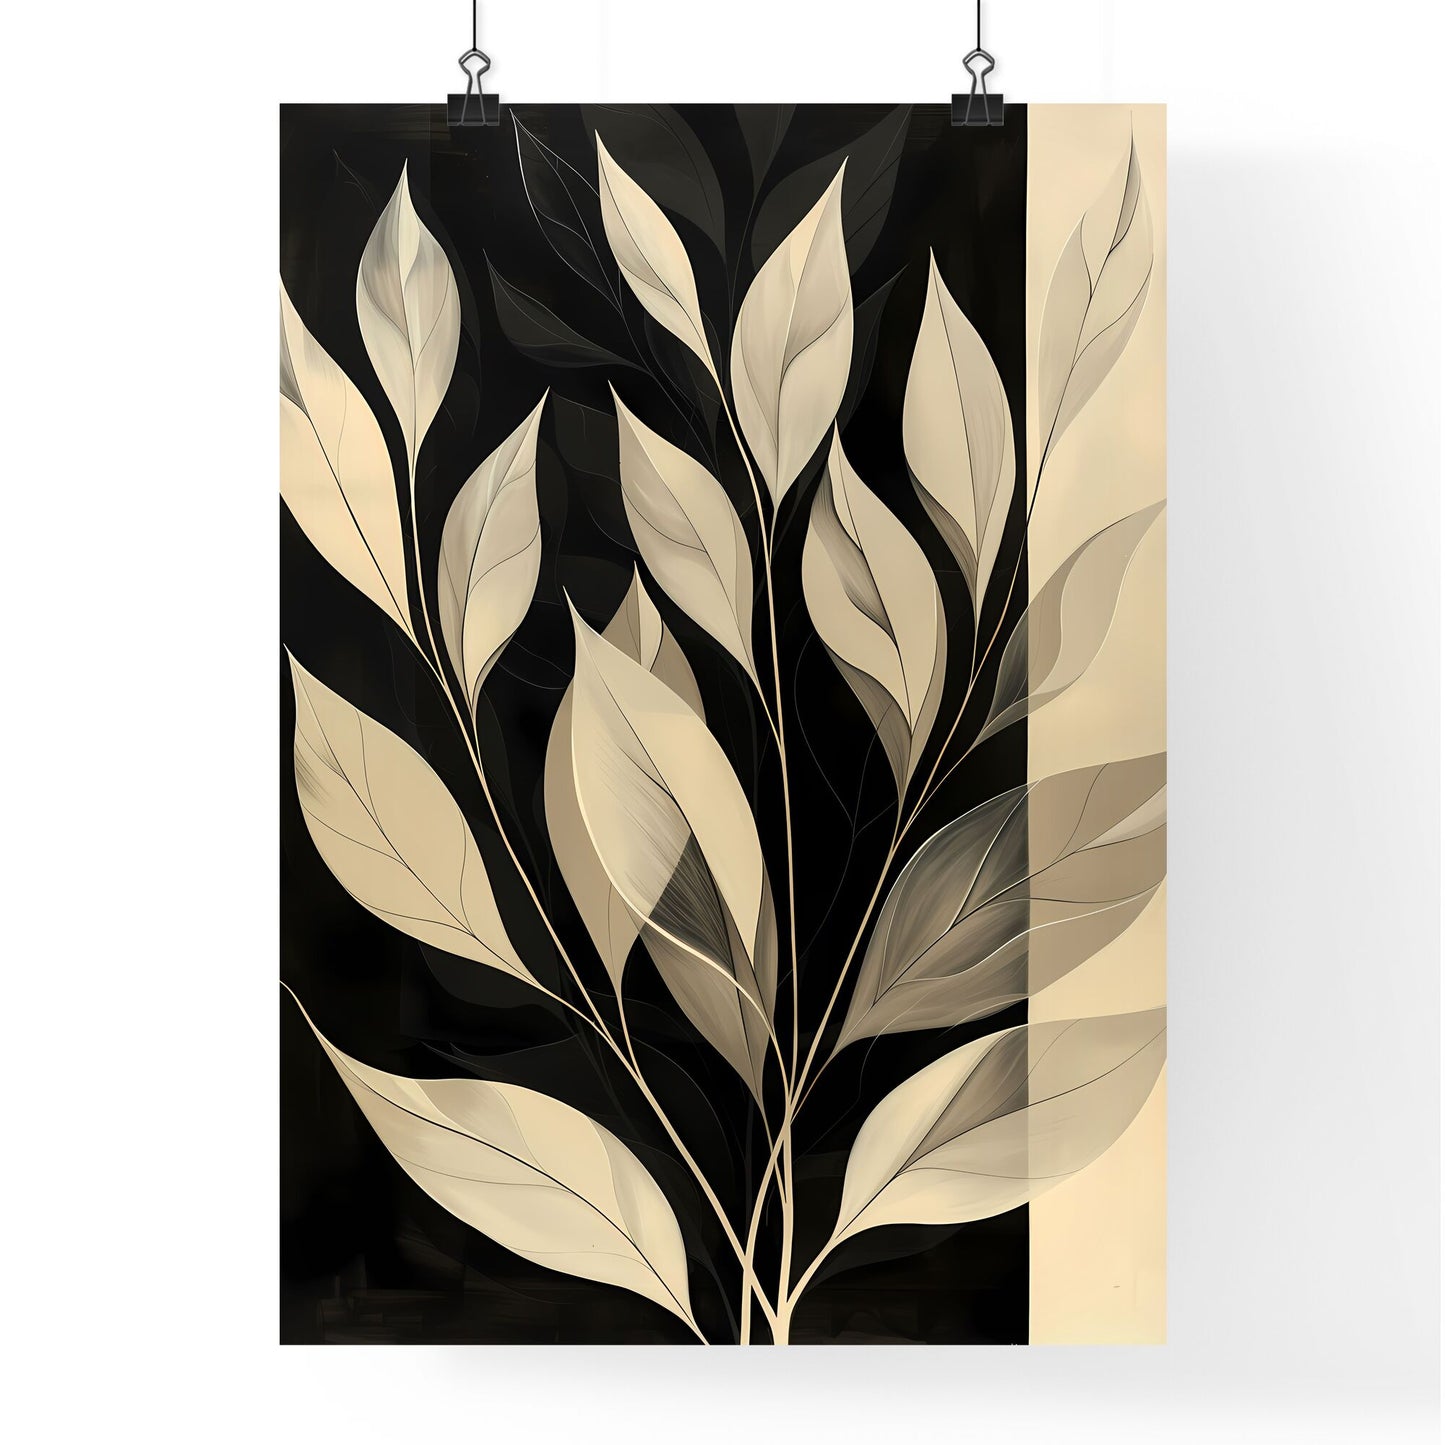 Vibrant Black and White Abstract Leaf Painting: Beige, Organic Shapes, Wavy Lines, Holotone, Bold Stencil, Close-Up Default Title